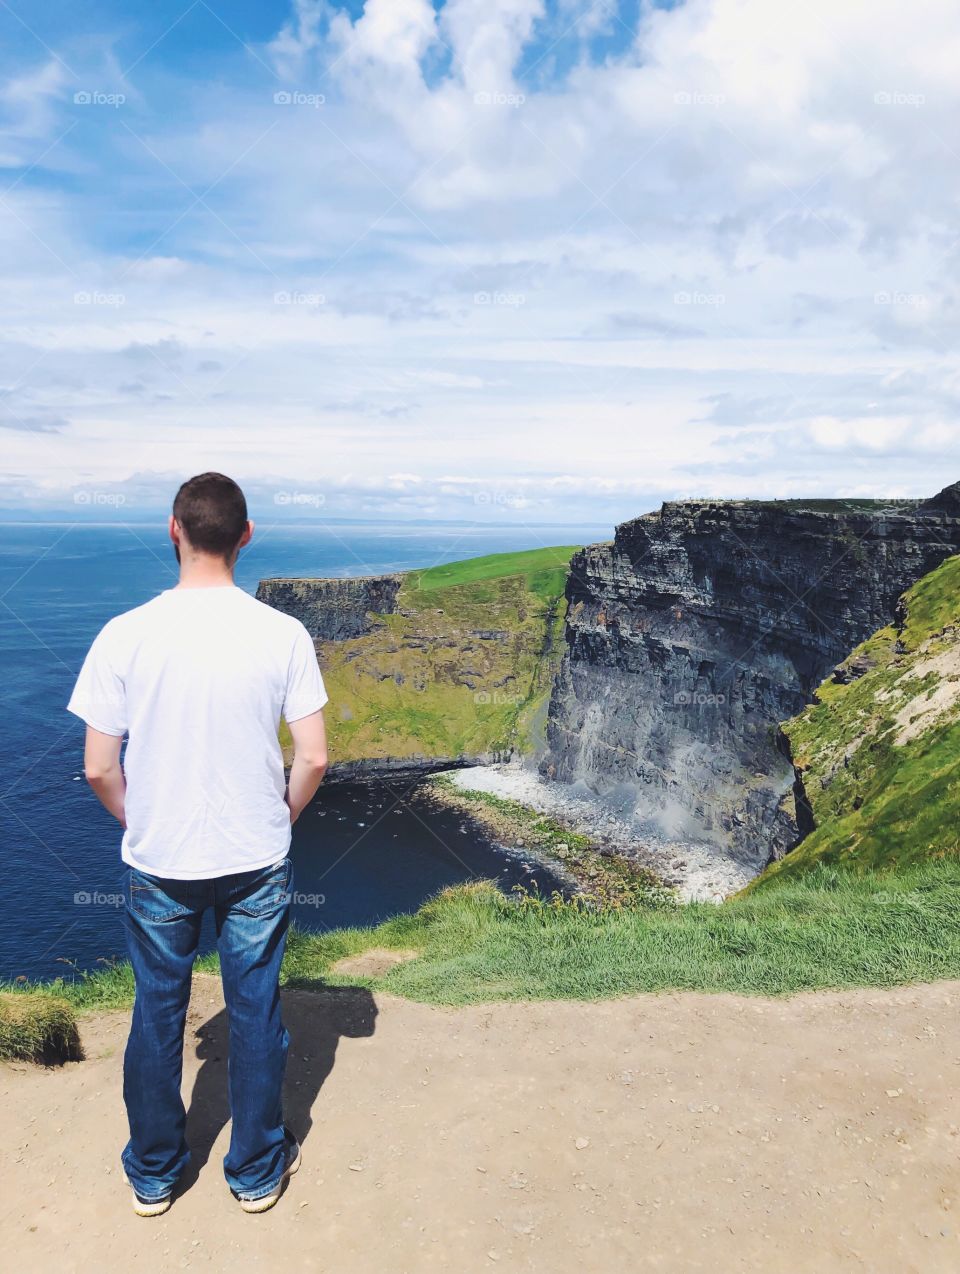 Looking over the Cliffs of Moher, Ireland. Sometimes standing in the midst of a site that makes you feel so small enlarges your perspective.